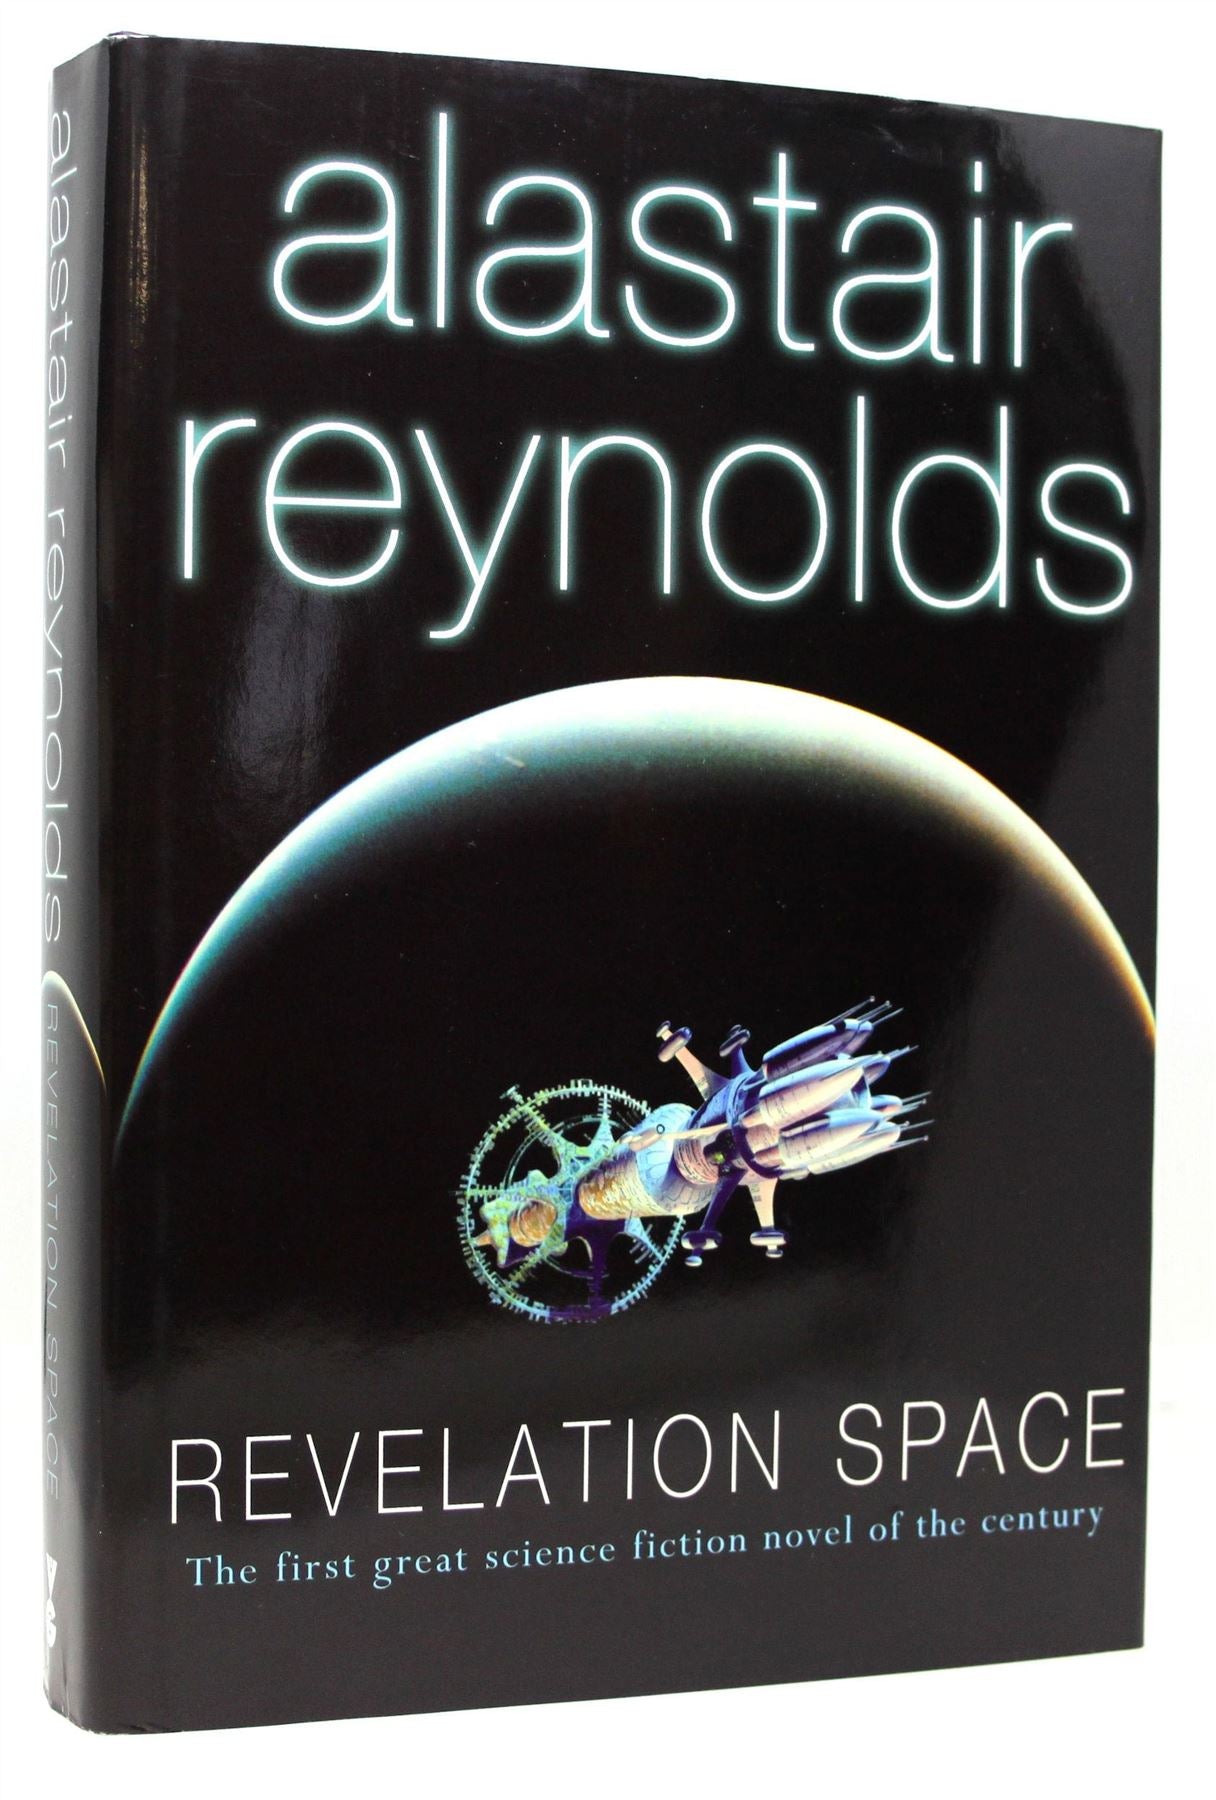 Galactic North (Revelation Space)